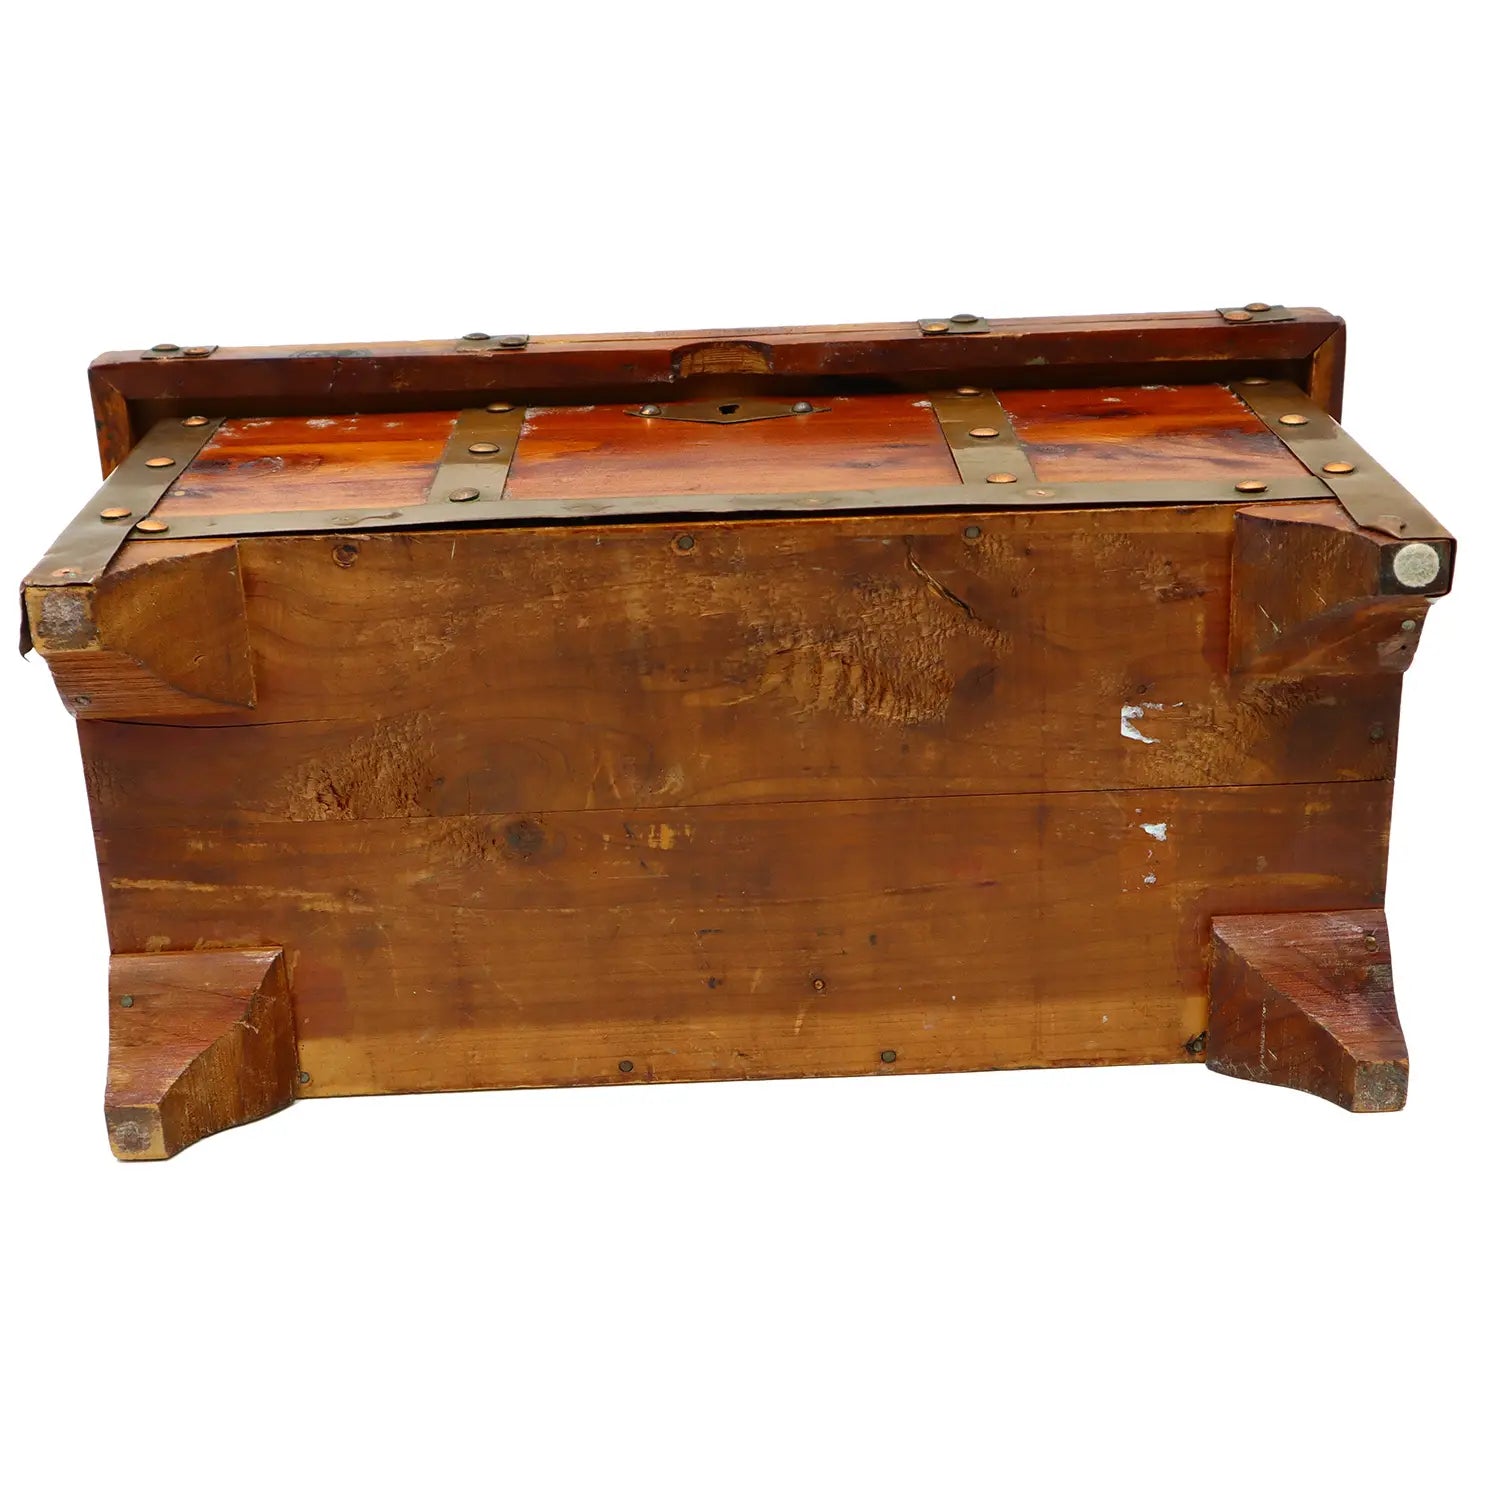 Bottom Support View - Vintage Primitive Cedar Wood Hand Made Miniature Chest for Storage